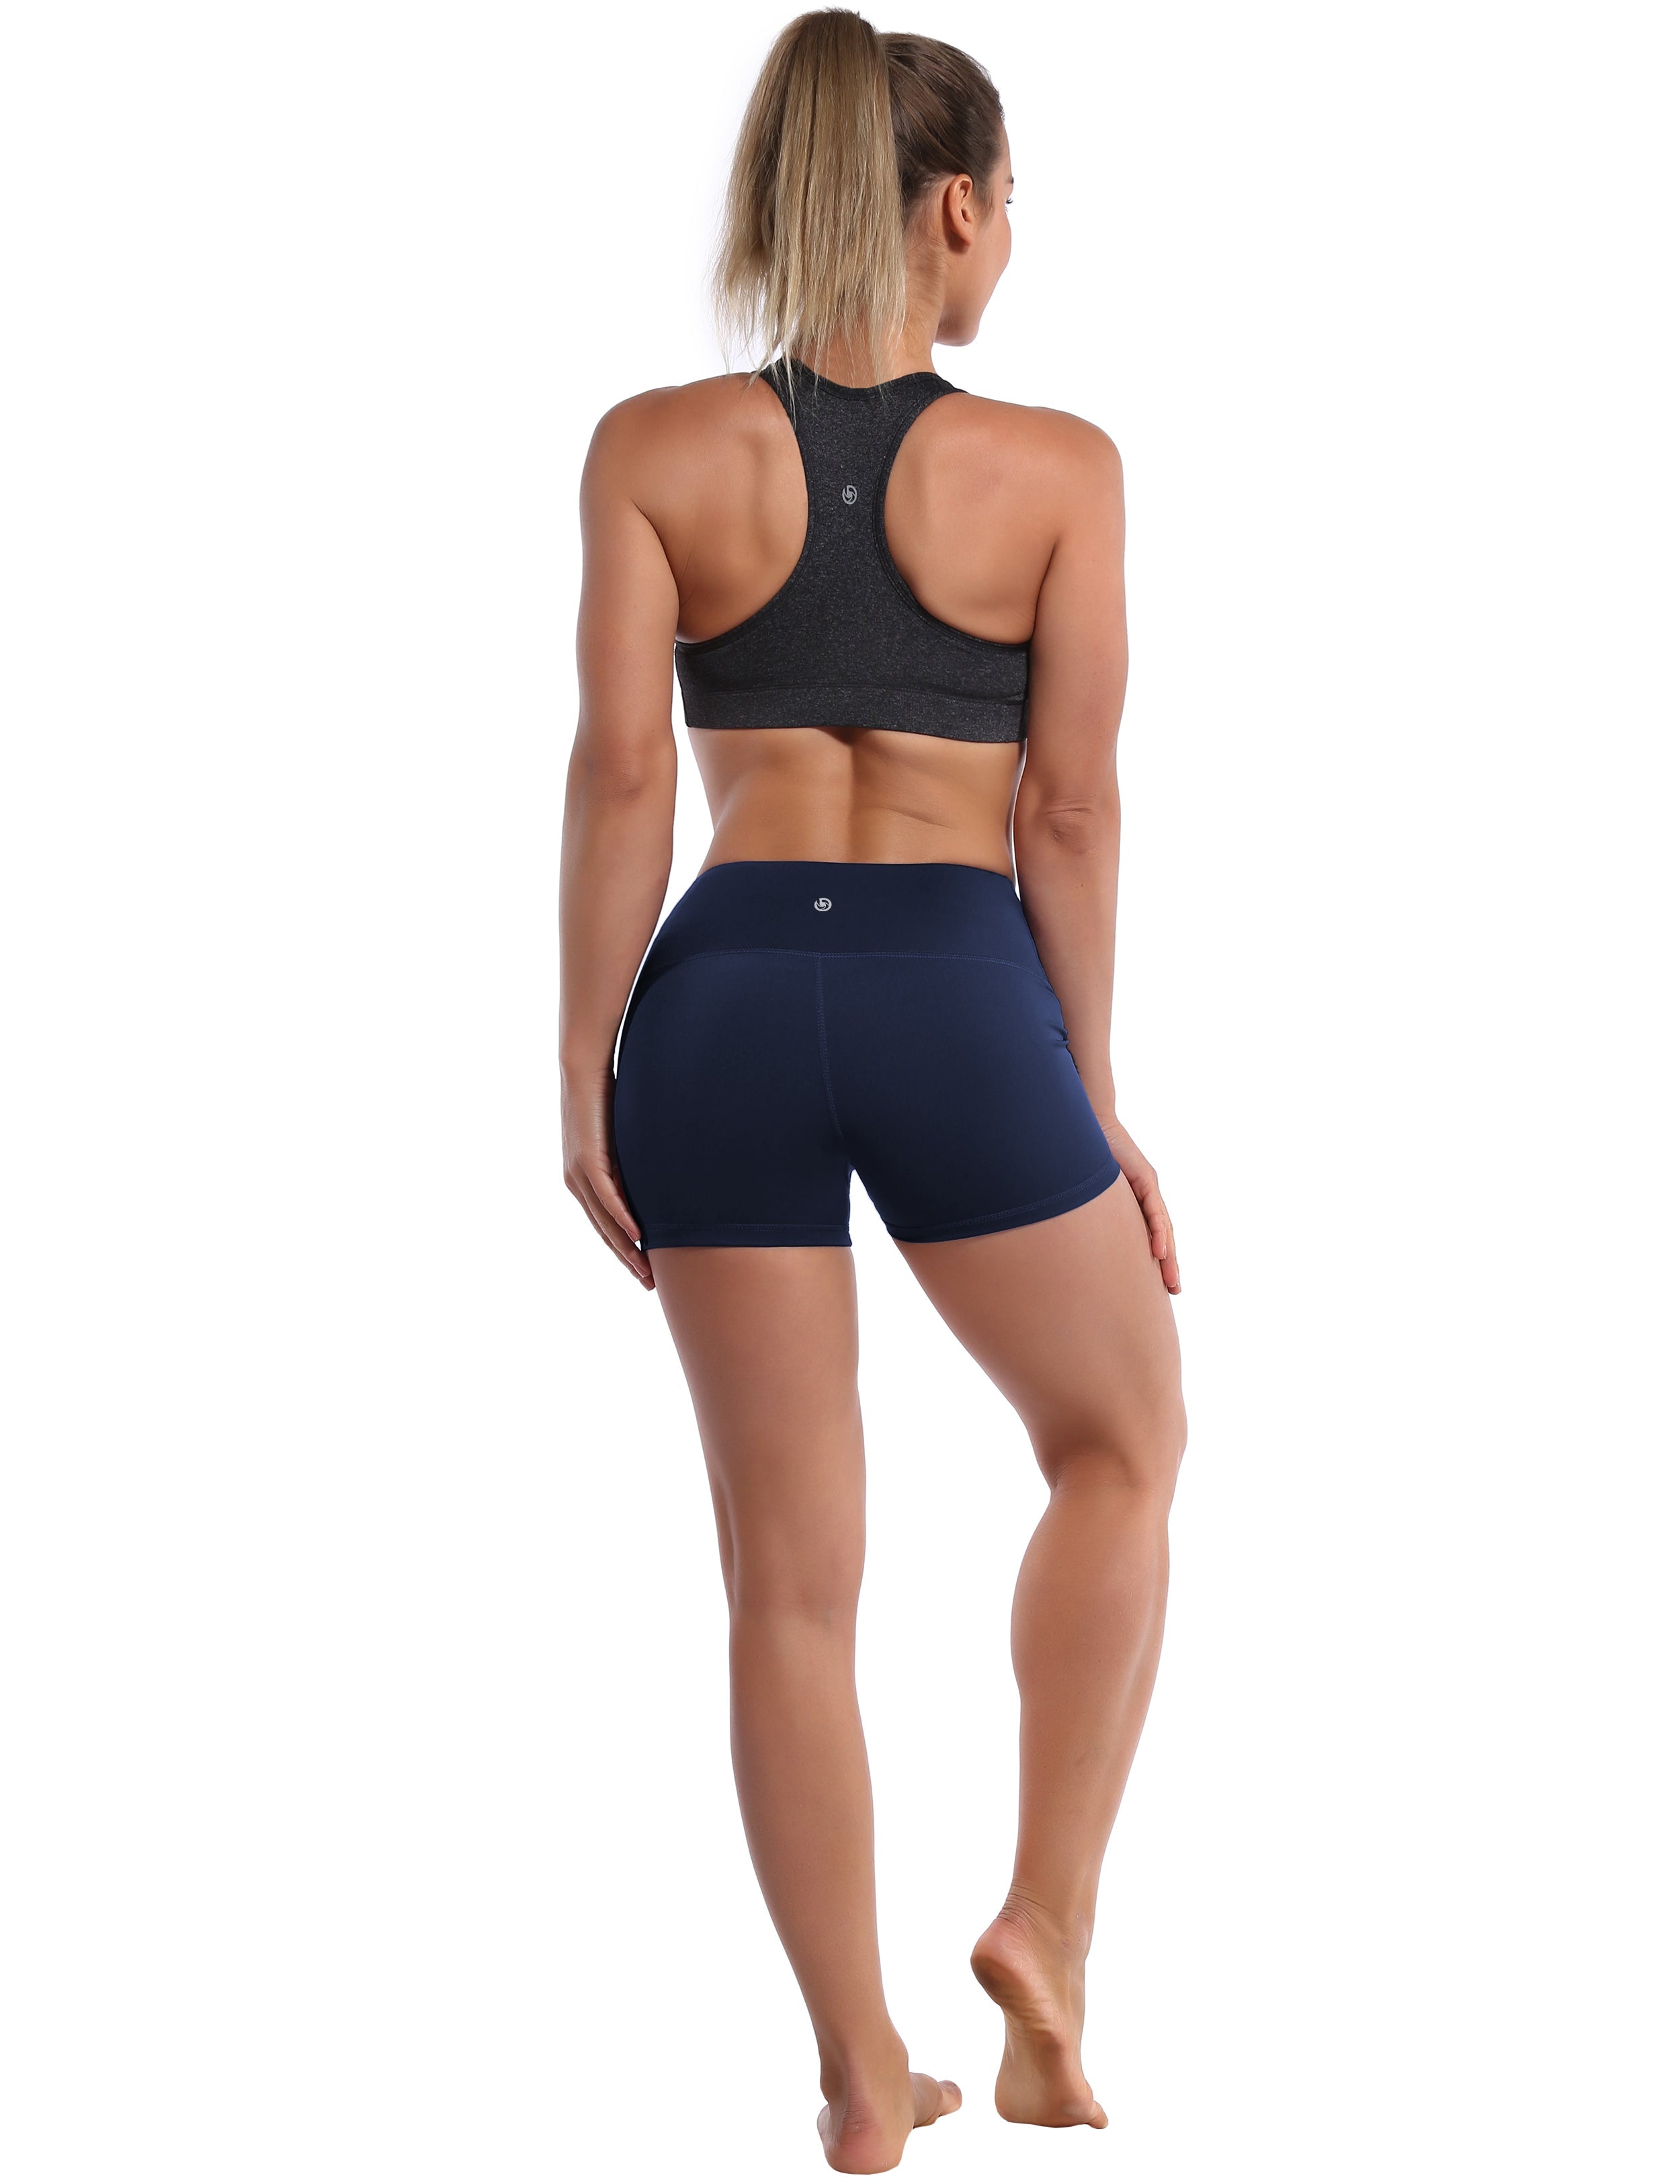 2.5" Golf Shorts darknavy Softest-ever fabric High elasticity High density 4-way stretch Fabric doesn't attract lint easily No see-through Moisture-wicking Machine wash 75% Nylon, 25% Spandex